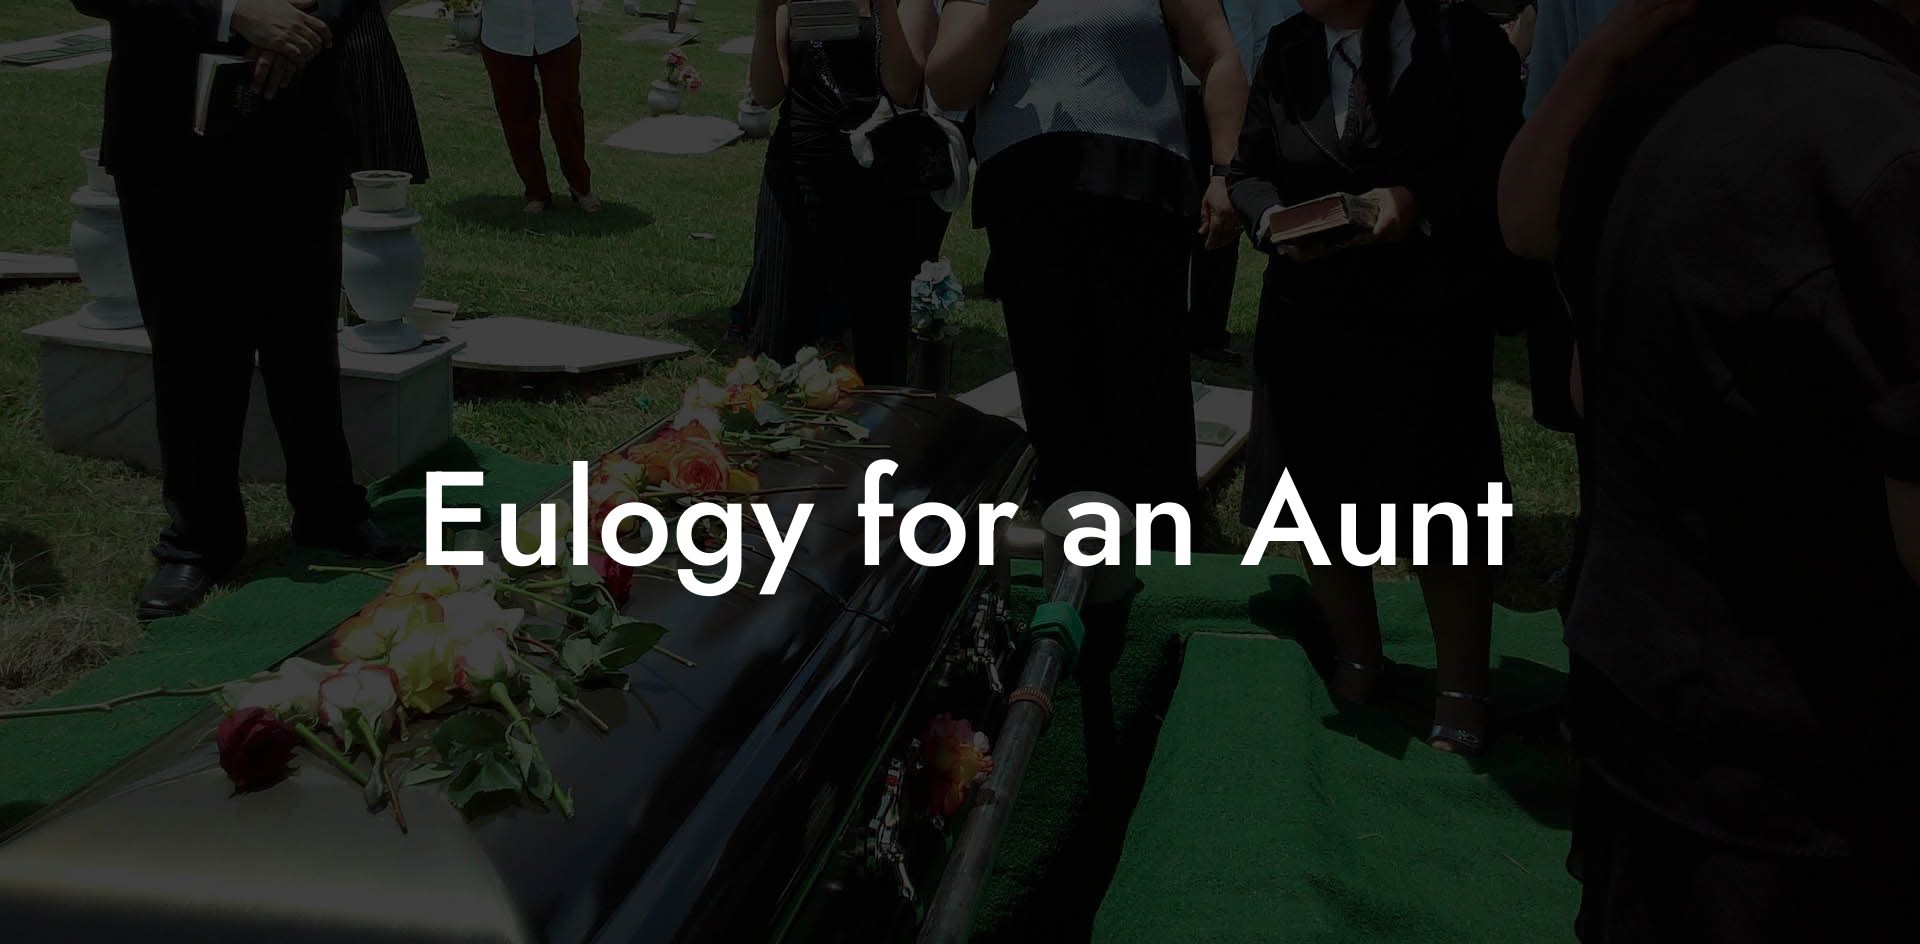 Eulogy for an Aunt